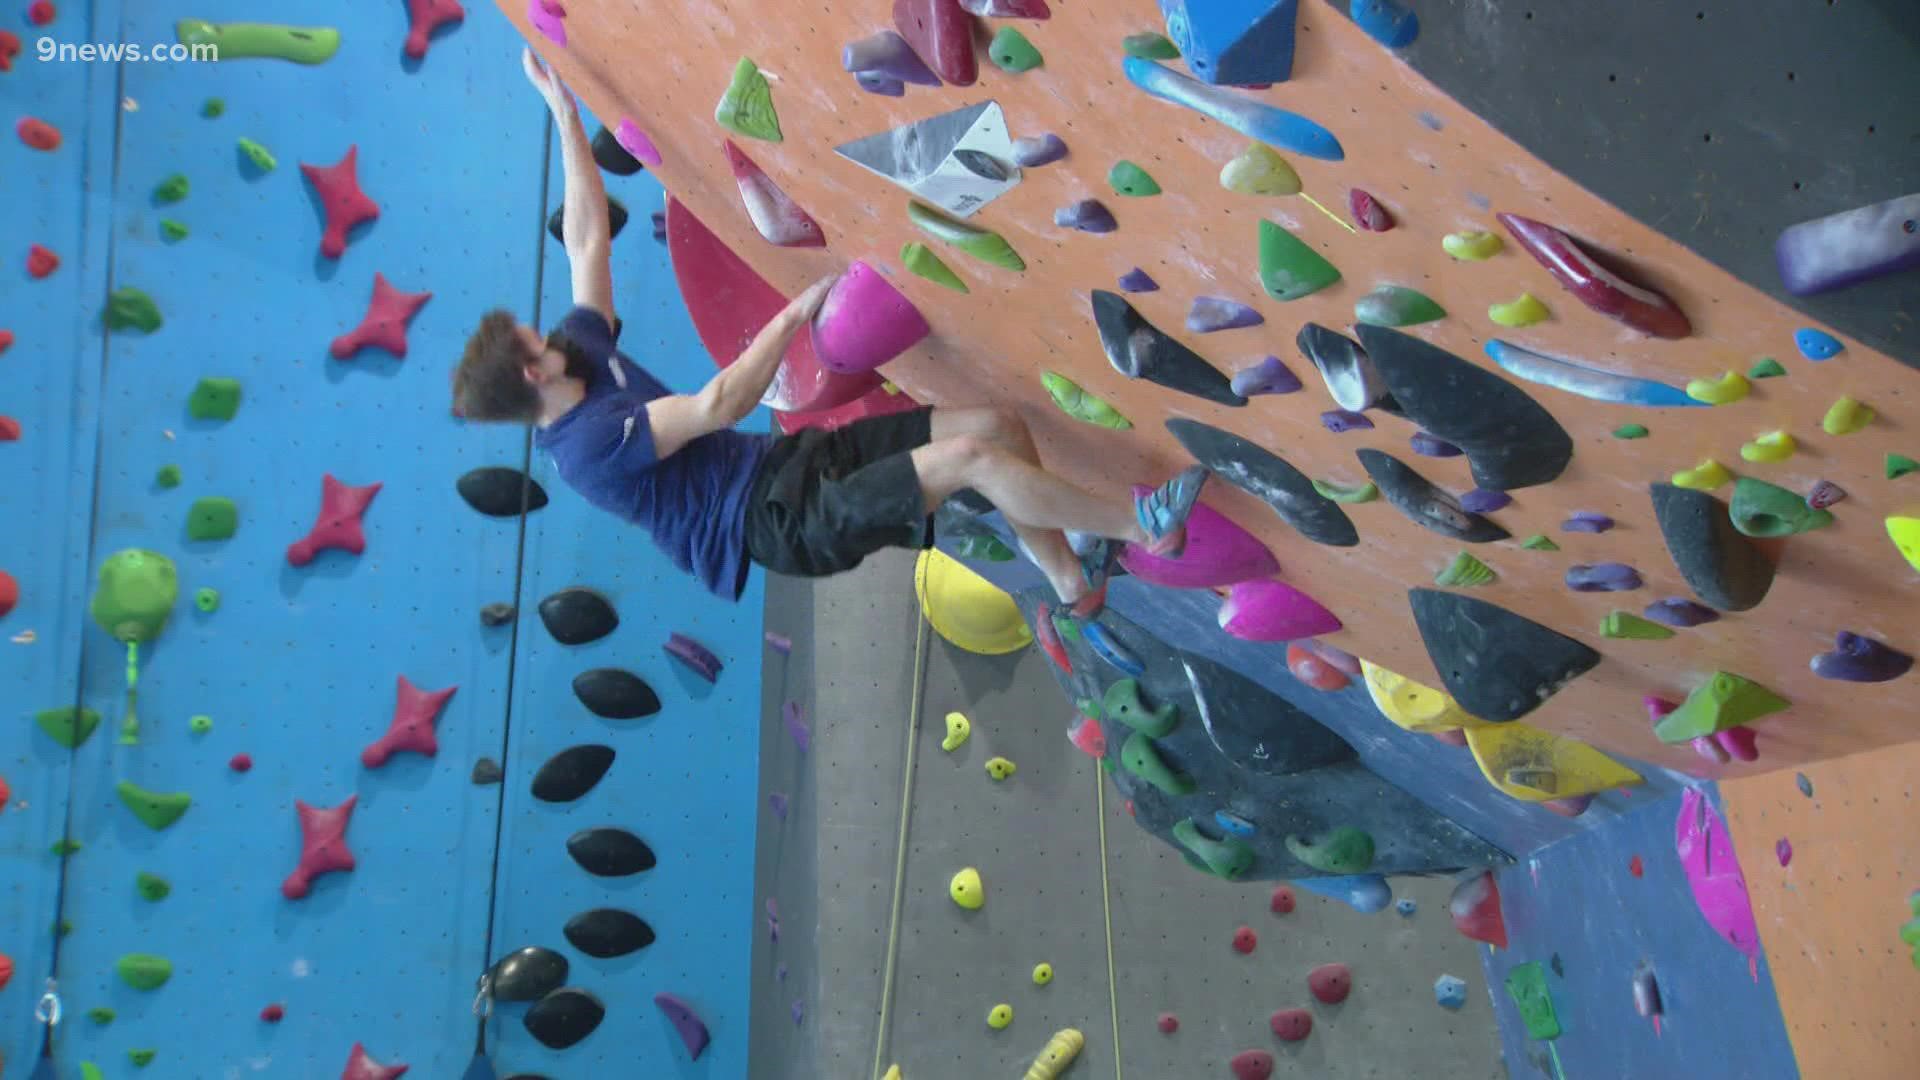 Colin Duffy of Broomfield, Colorado was only 16-years-old when he qualified for the Olympics in the debut of sport climbing.